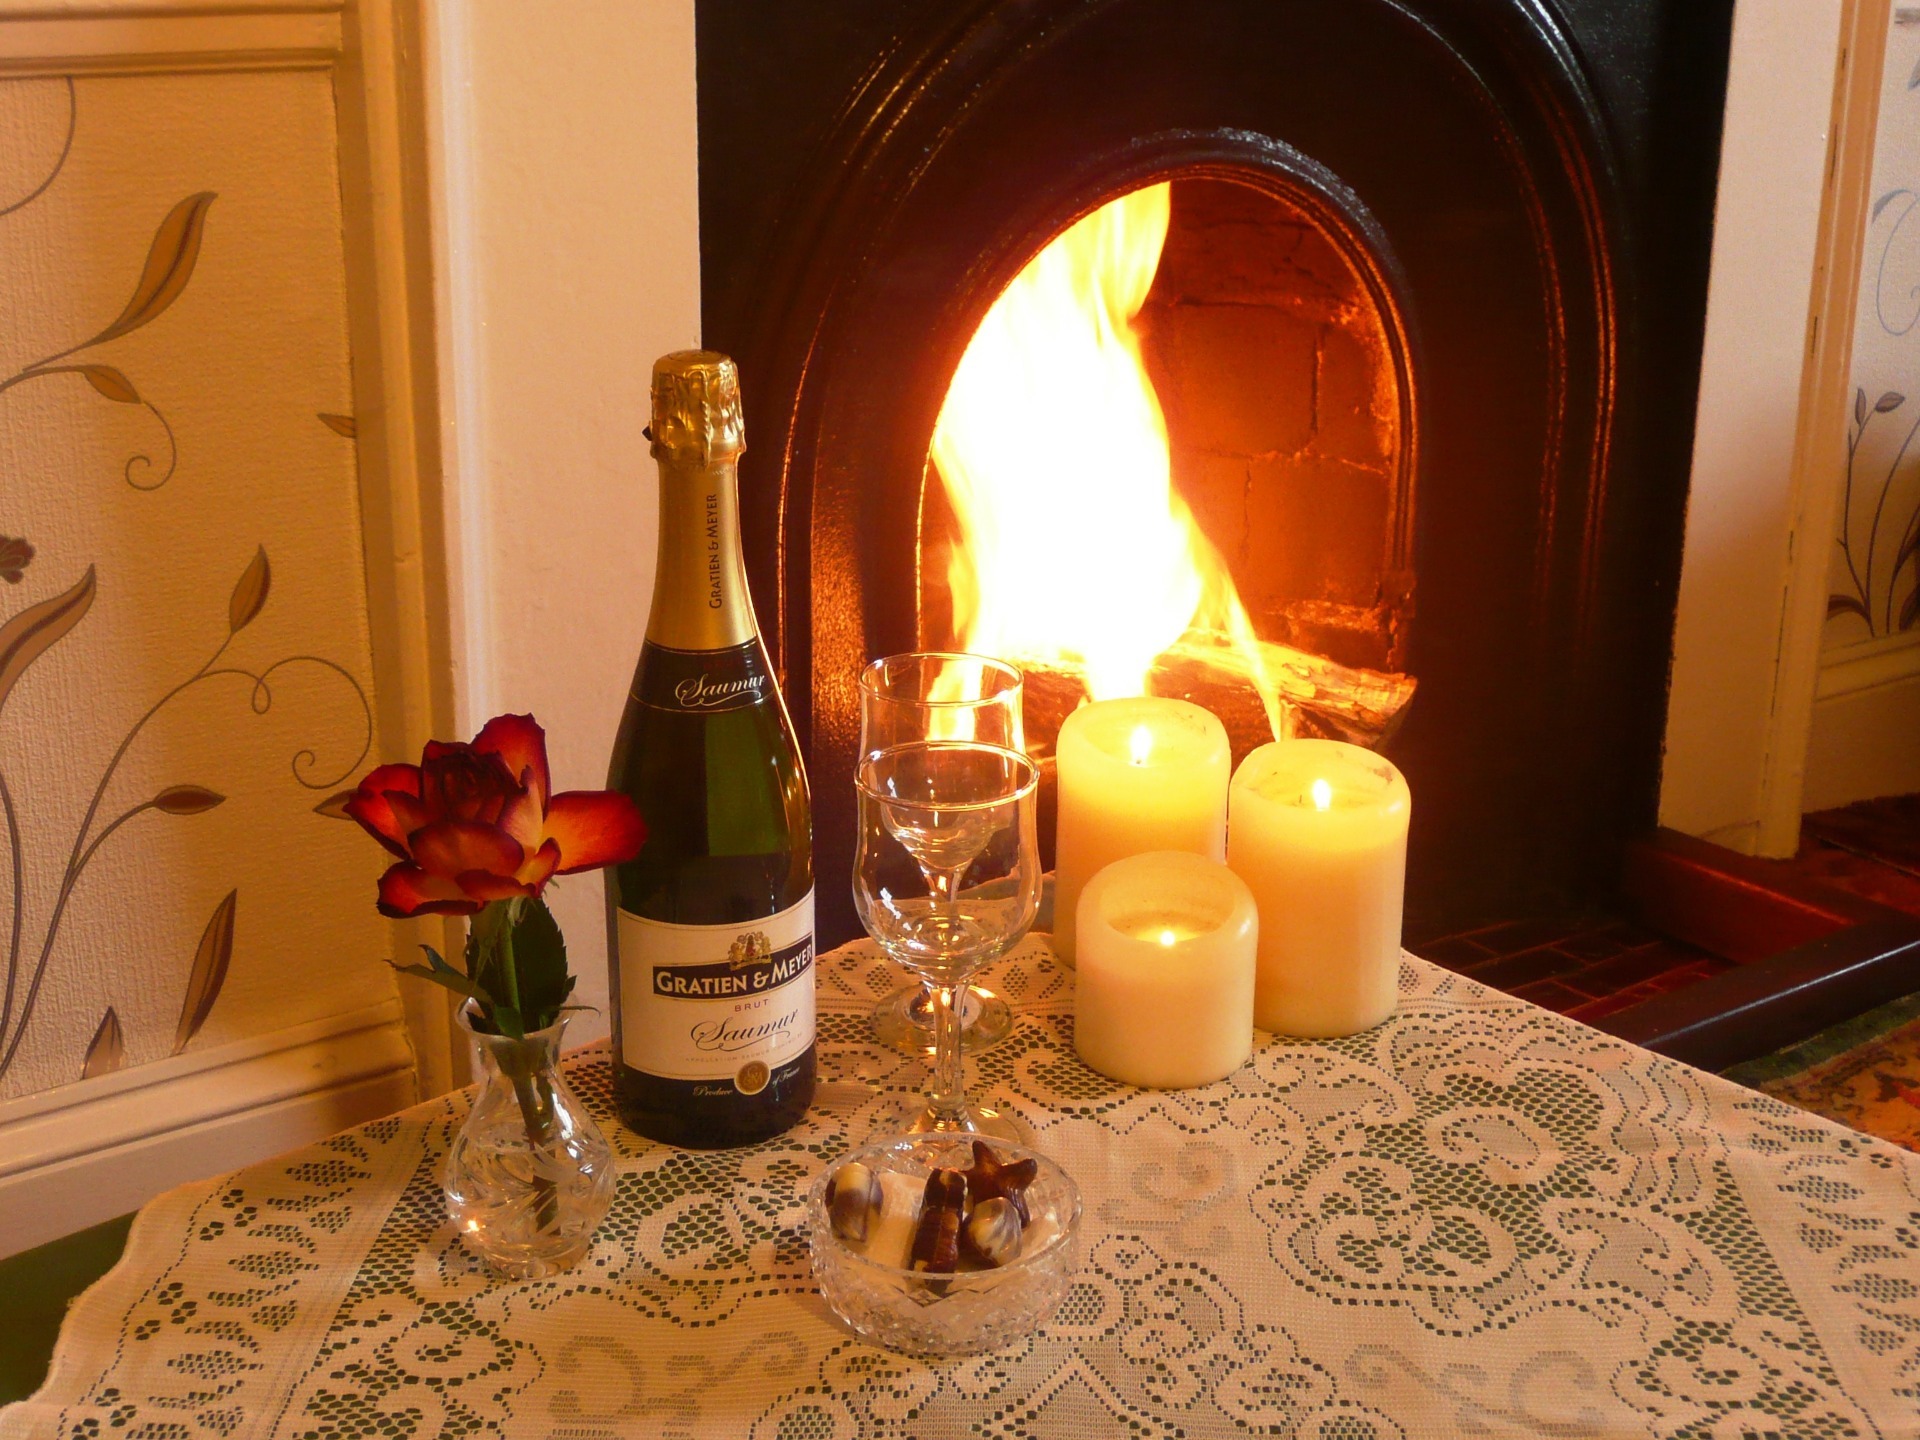 Champagne, candles and a roaring fire